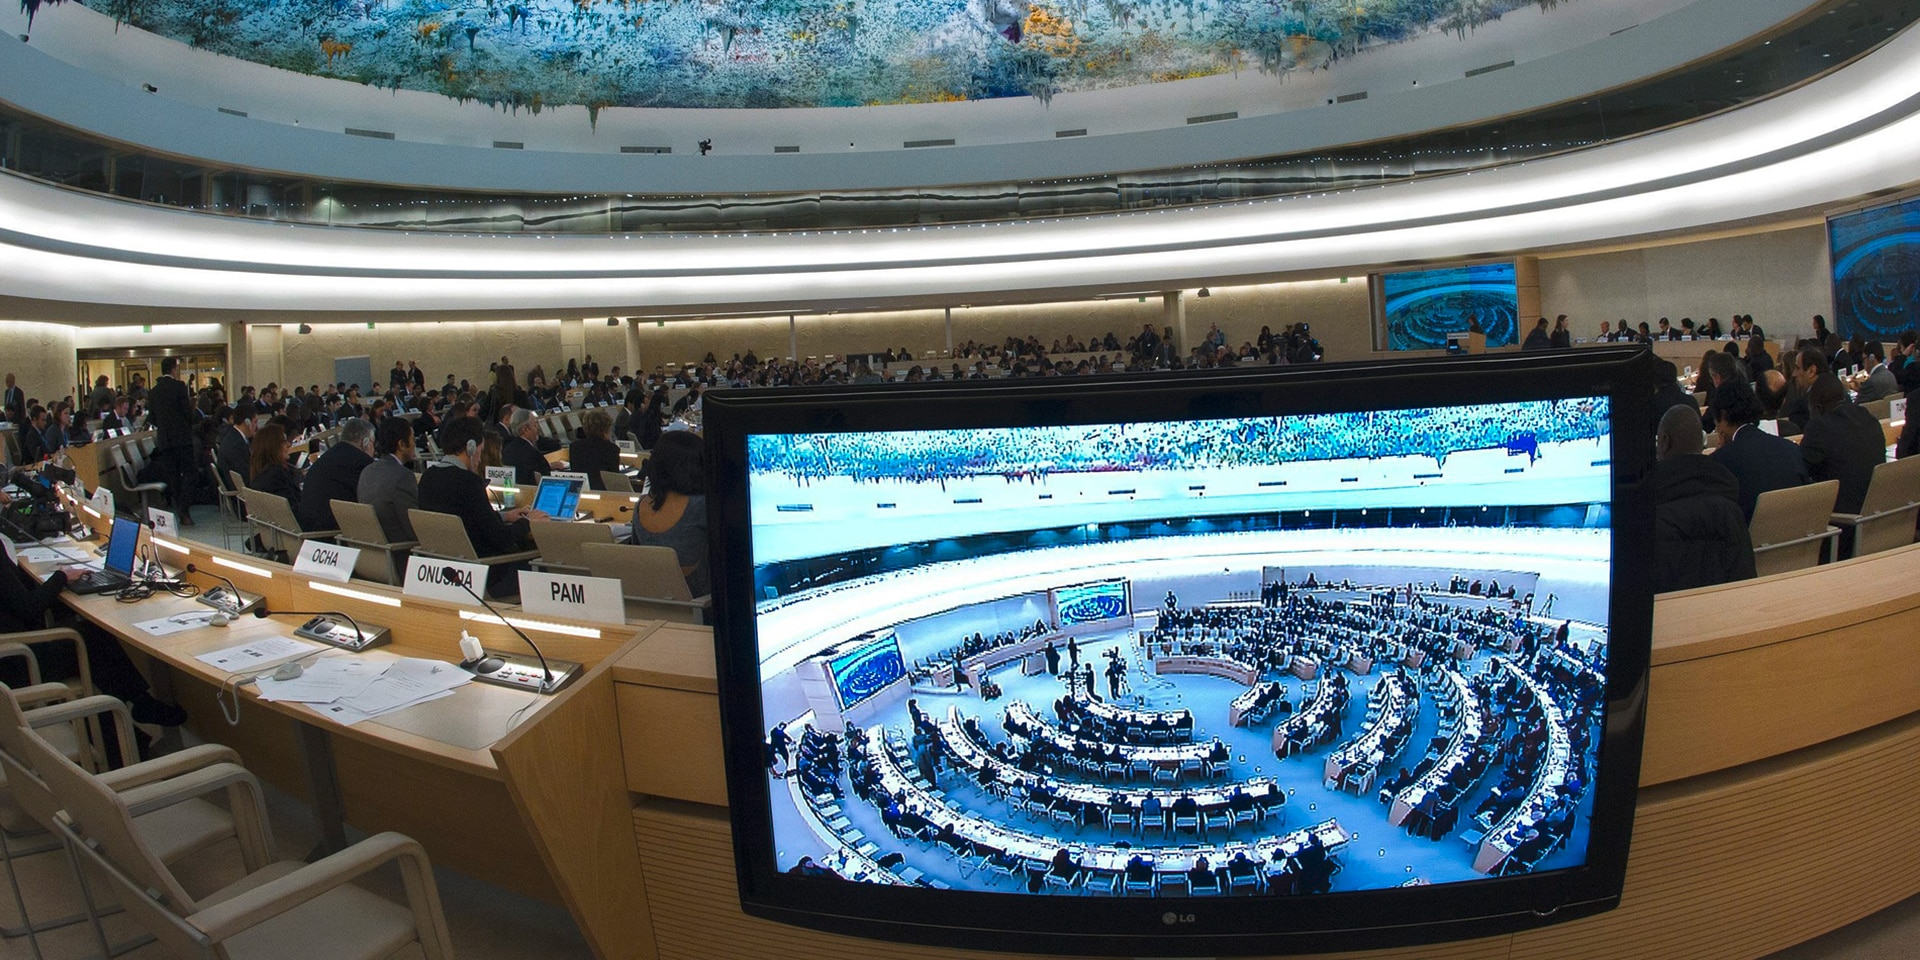 The Human Rights and Alliance of Civilizations Room at the United Nations in Geneva, where the Human Rights Council convenes. In the foreground, a screen showing footage of the conference room.